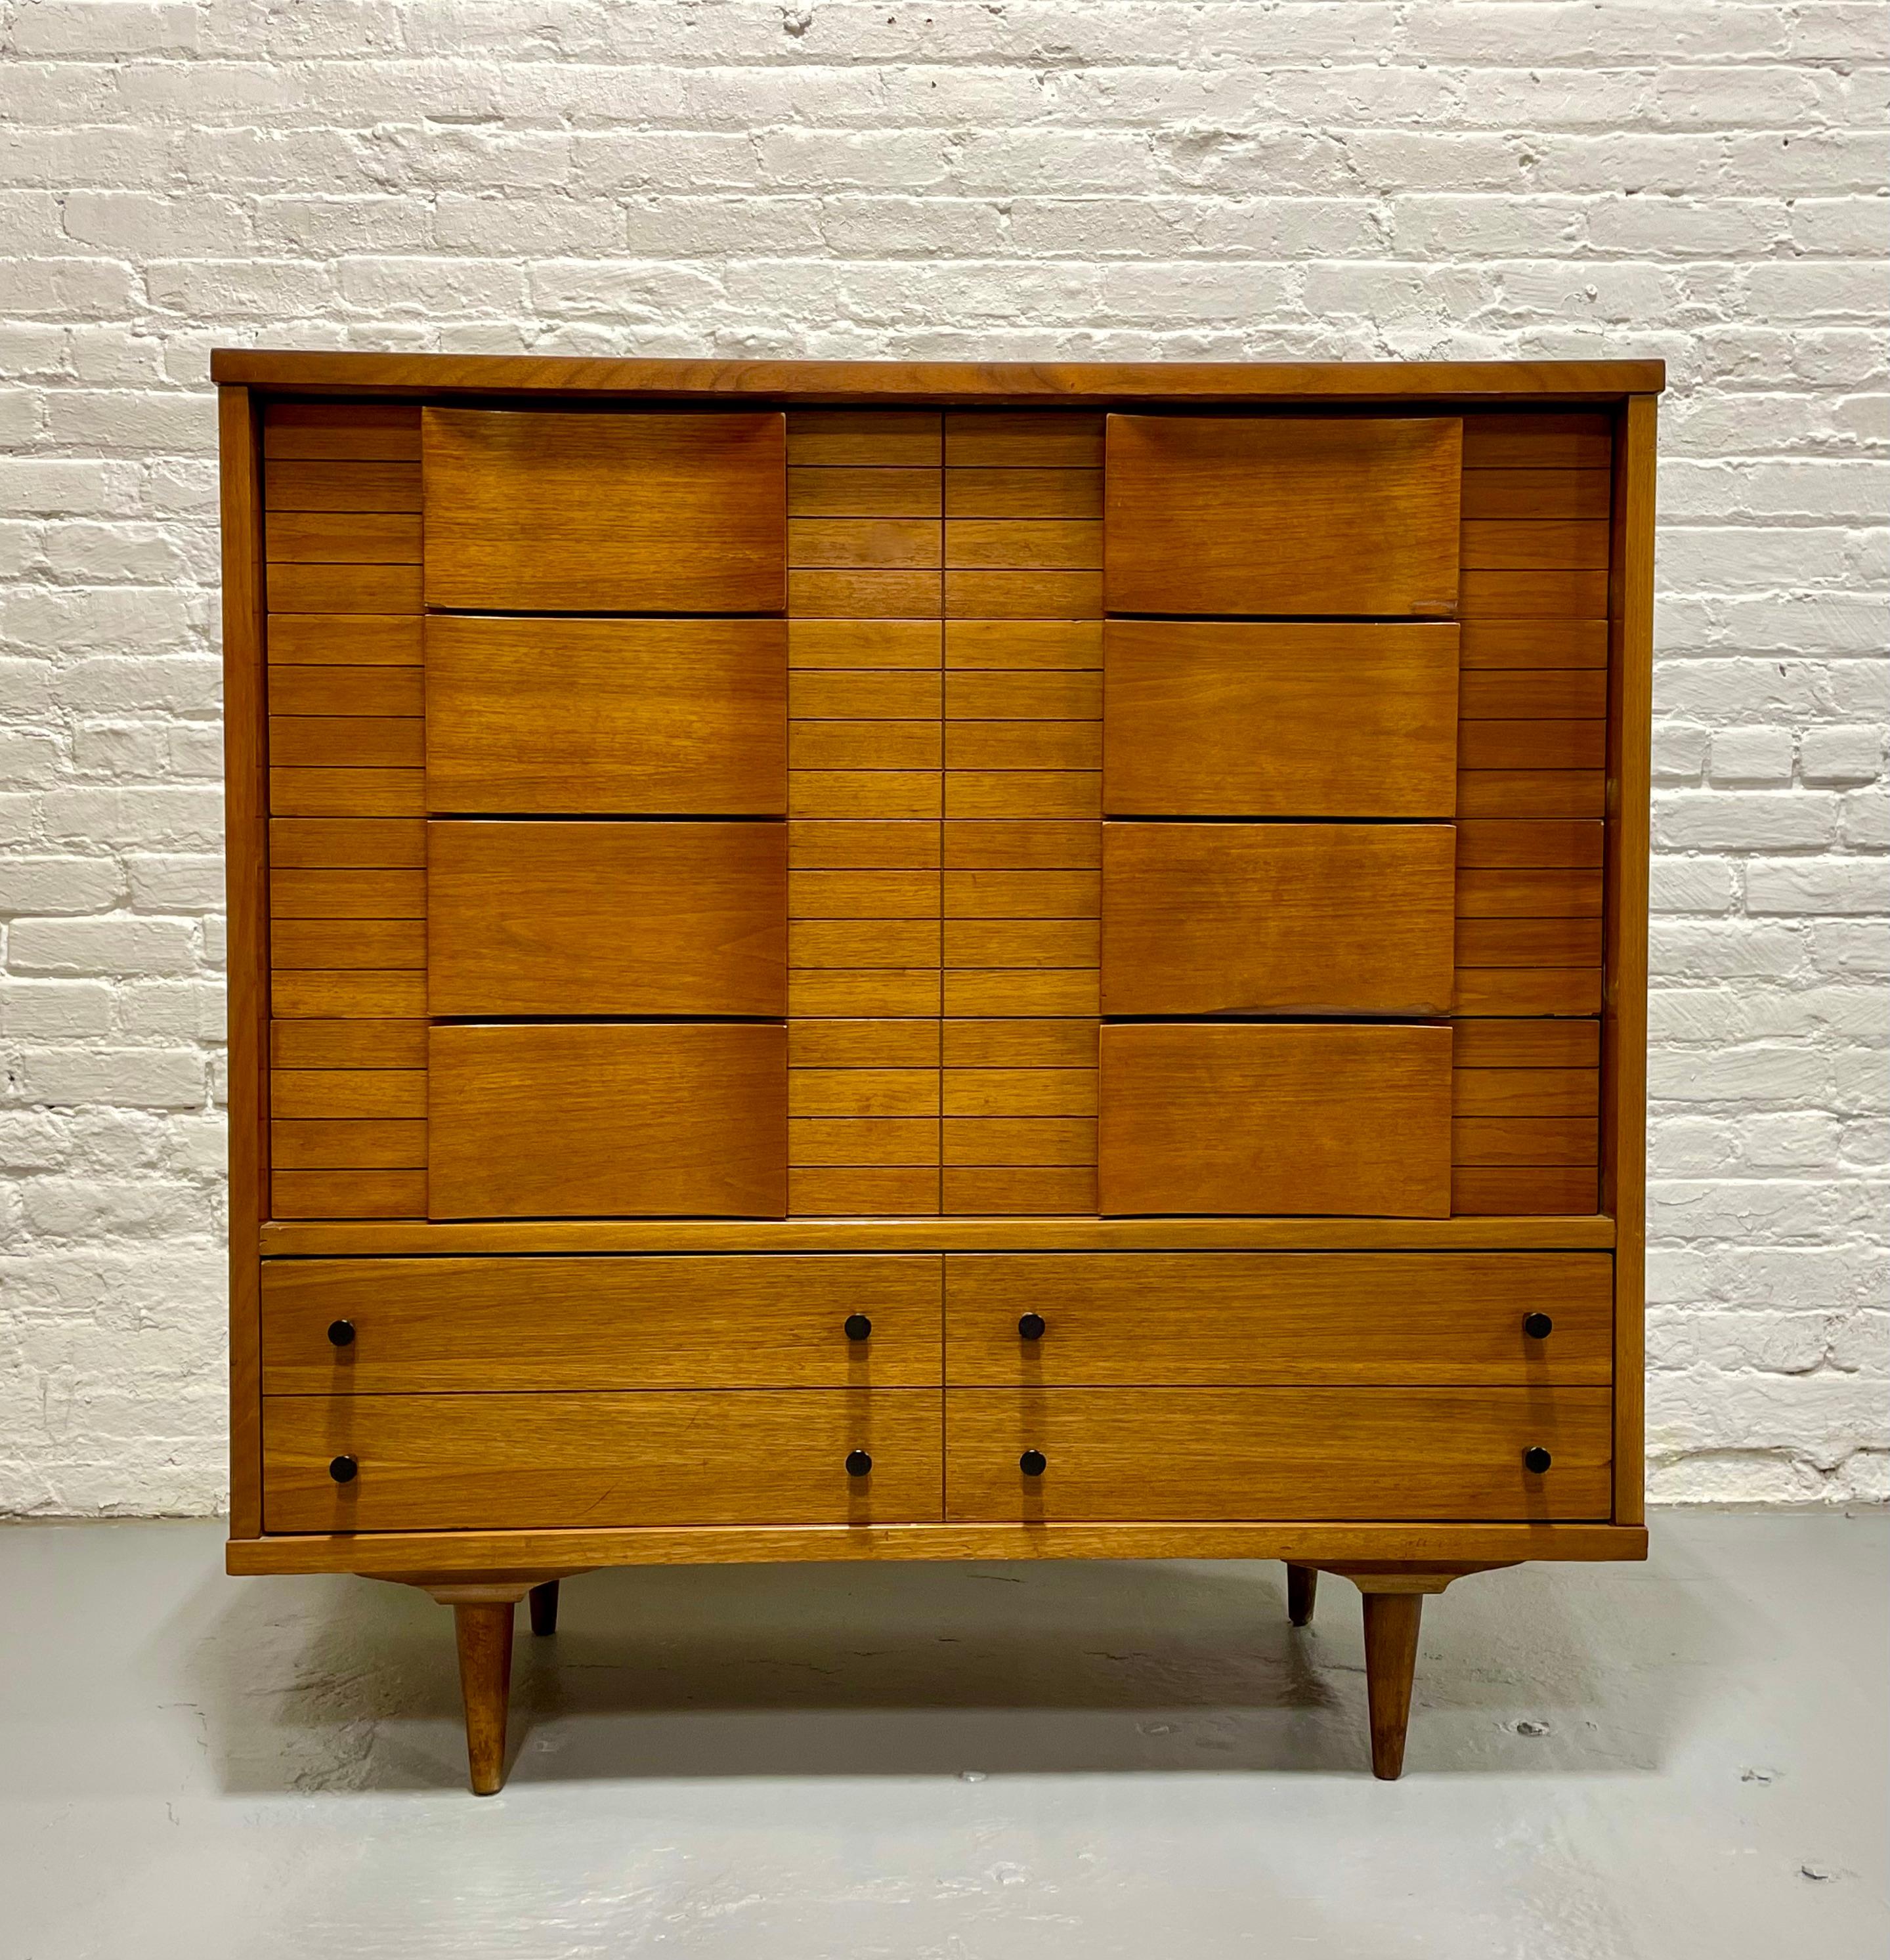 Mid Century Modern Sculpted Dresser by Johnson Carper., c. 1960's.  Beautiful architectural detailing with sculpted drawer pulls. Five spacious dovetailed drawers offer plenty of storage space. Laminated woodgrain tabletop, perfect for sustaining a